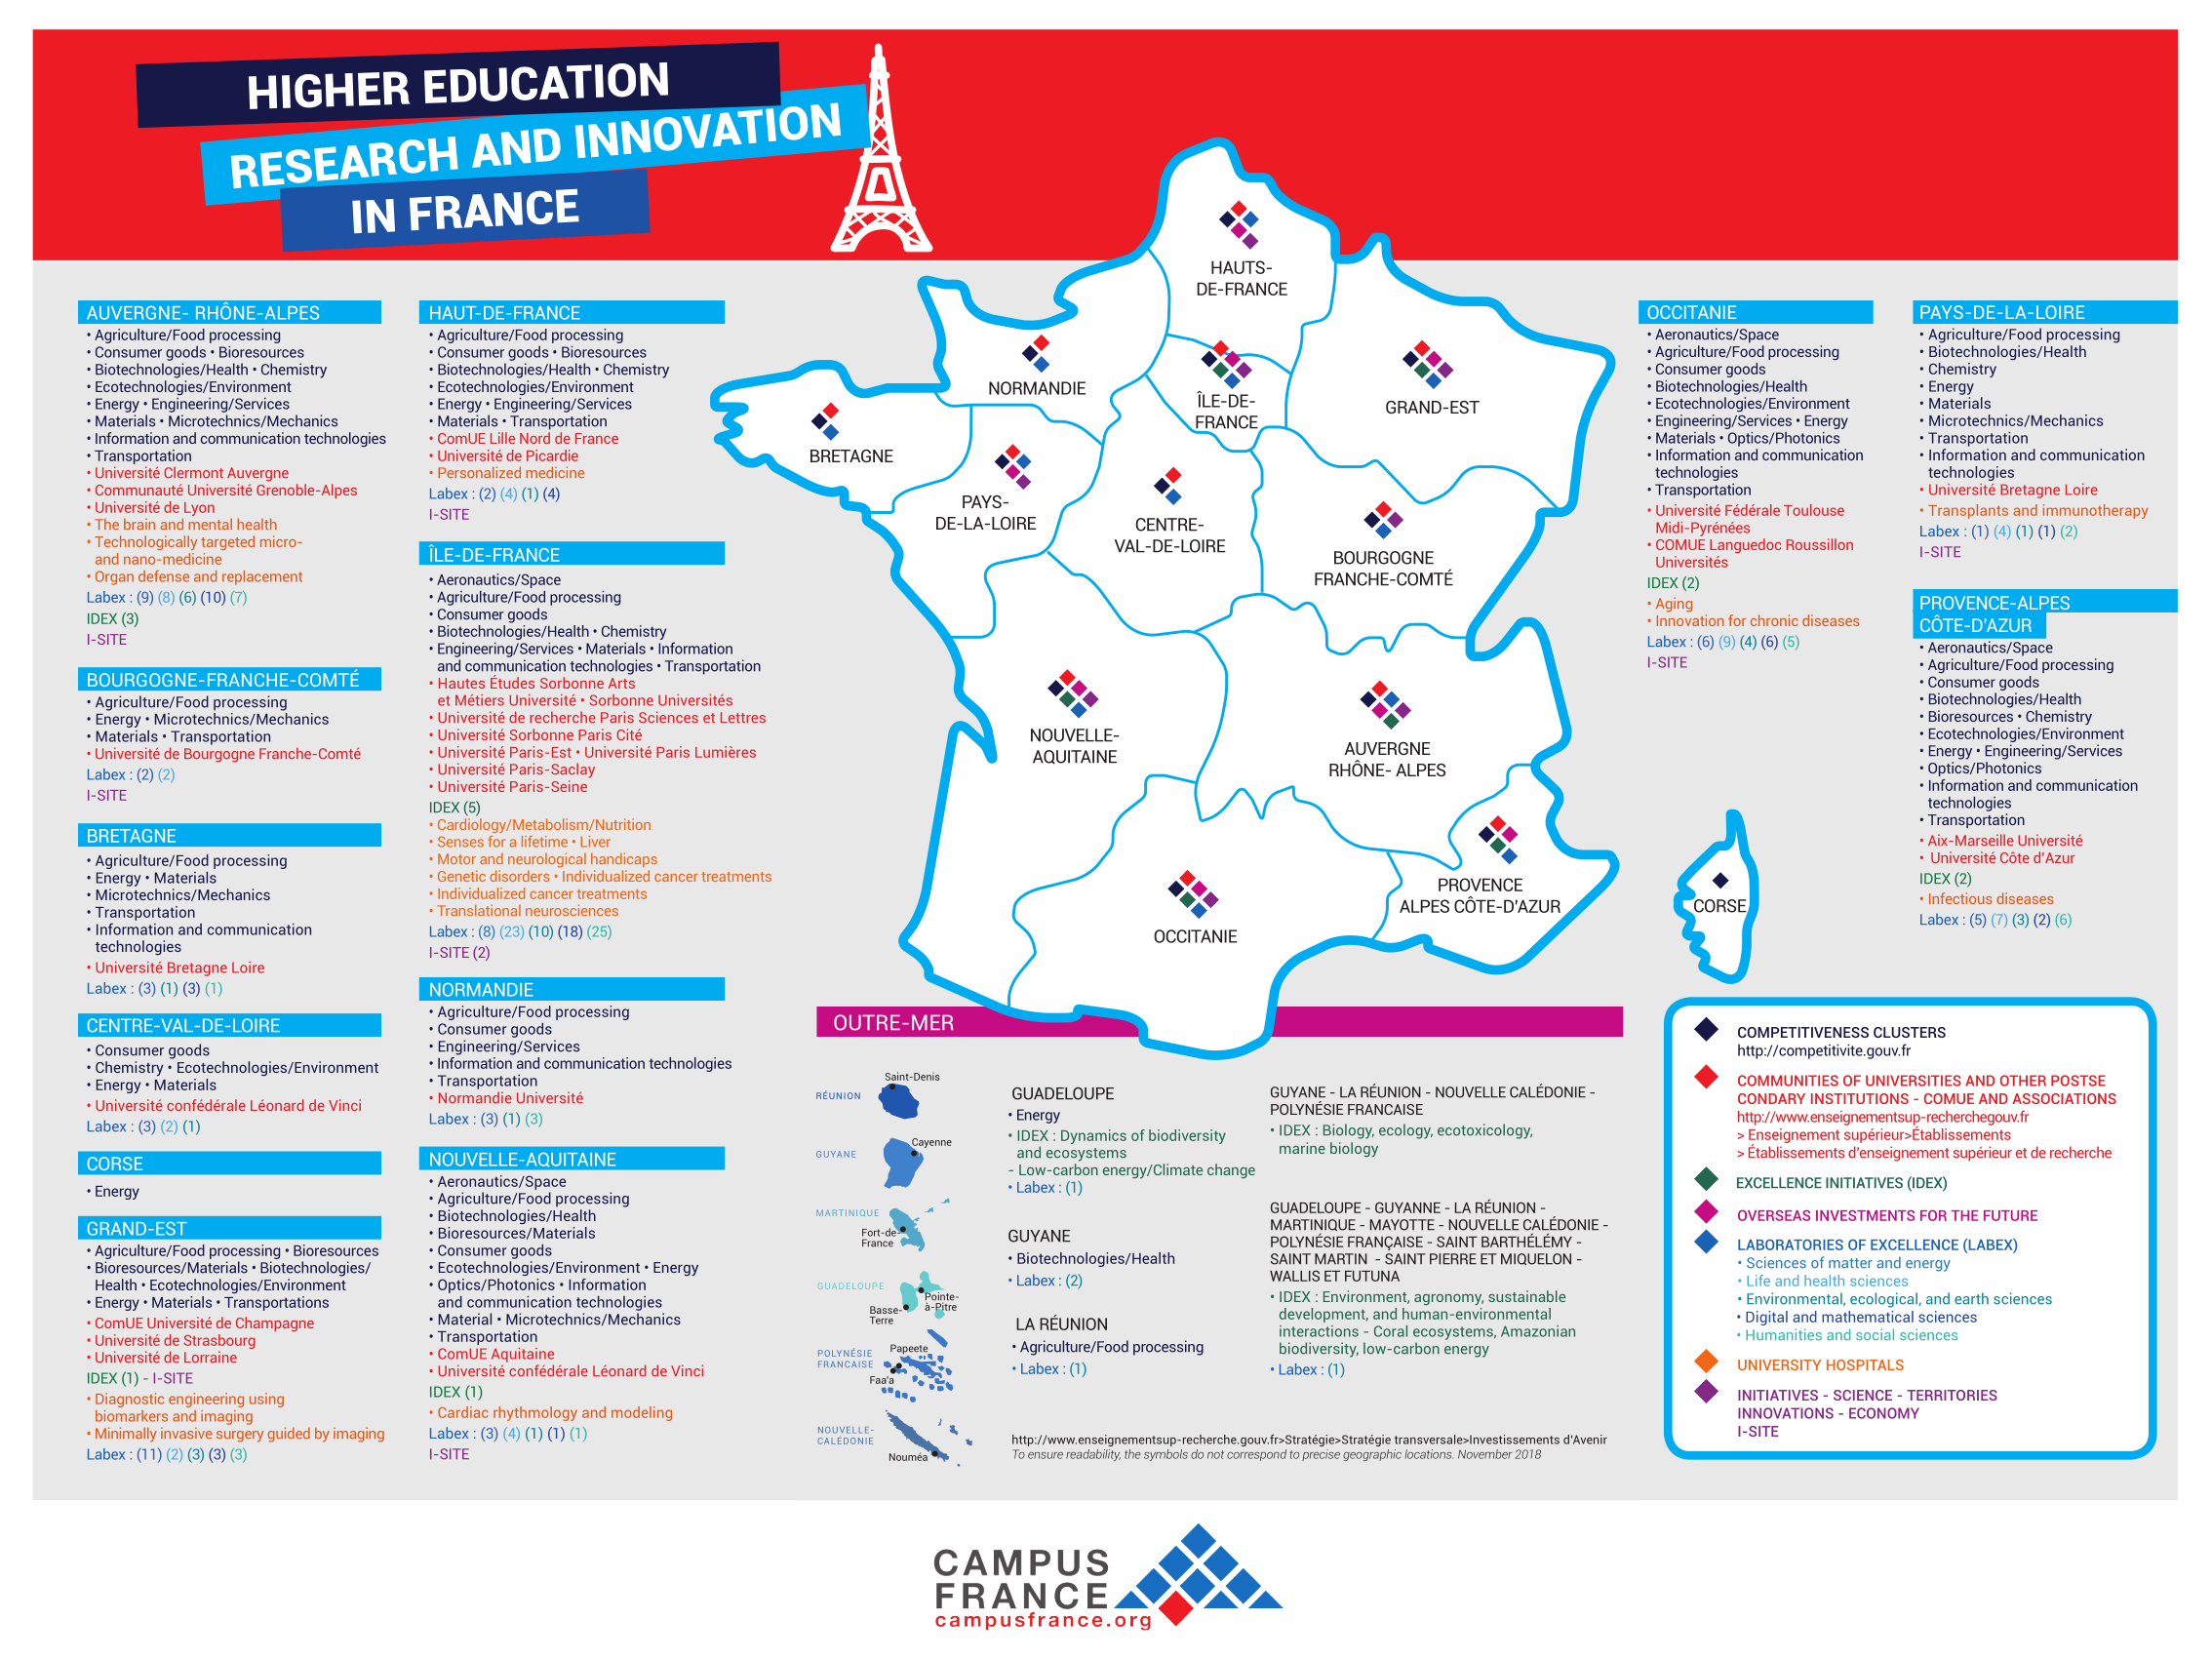 Higher Education Research and Innovation in France